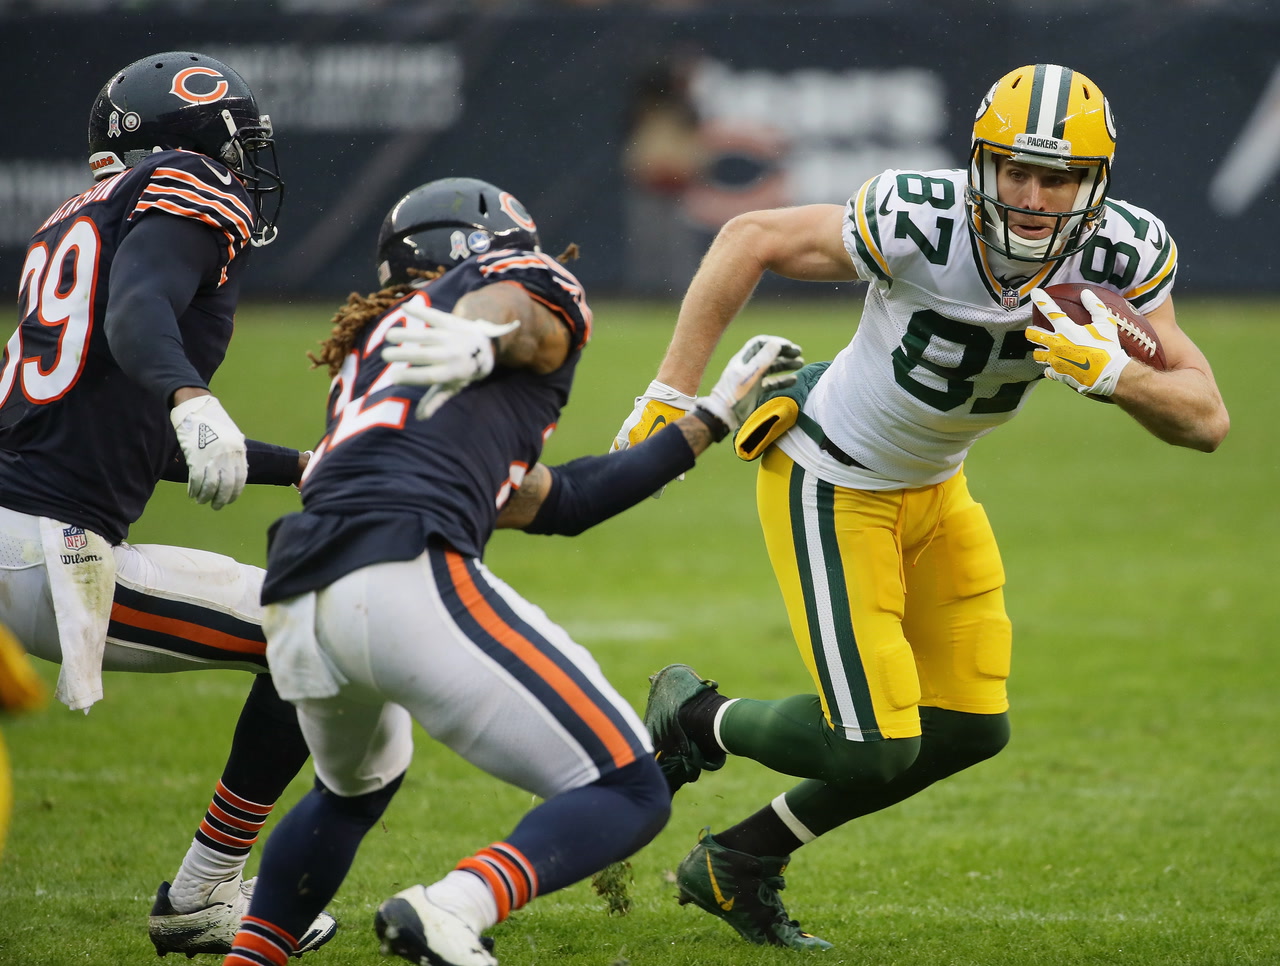 Raiders land Jordy Nelson for 2 years, $15M; Crabtree cut.